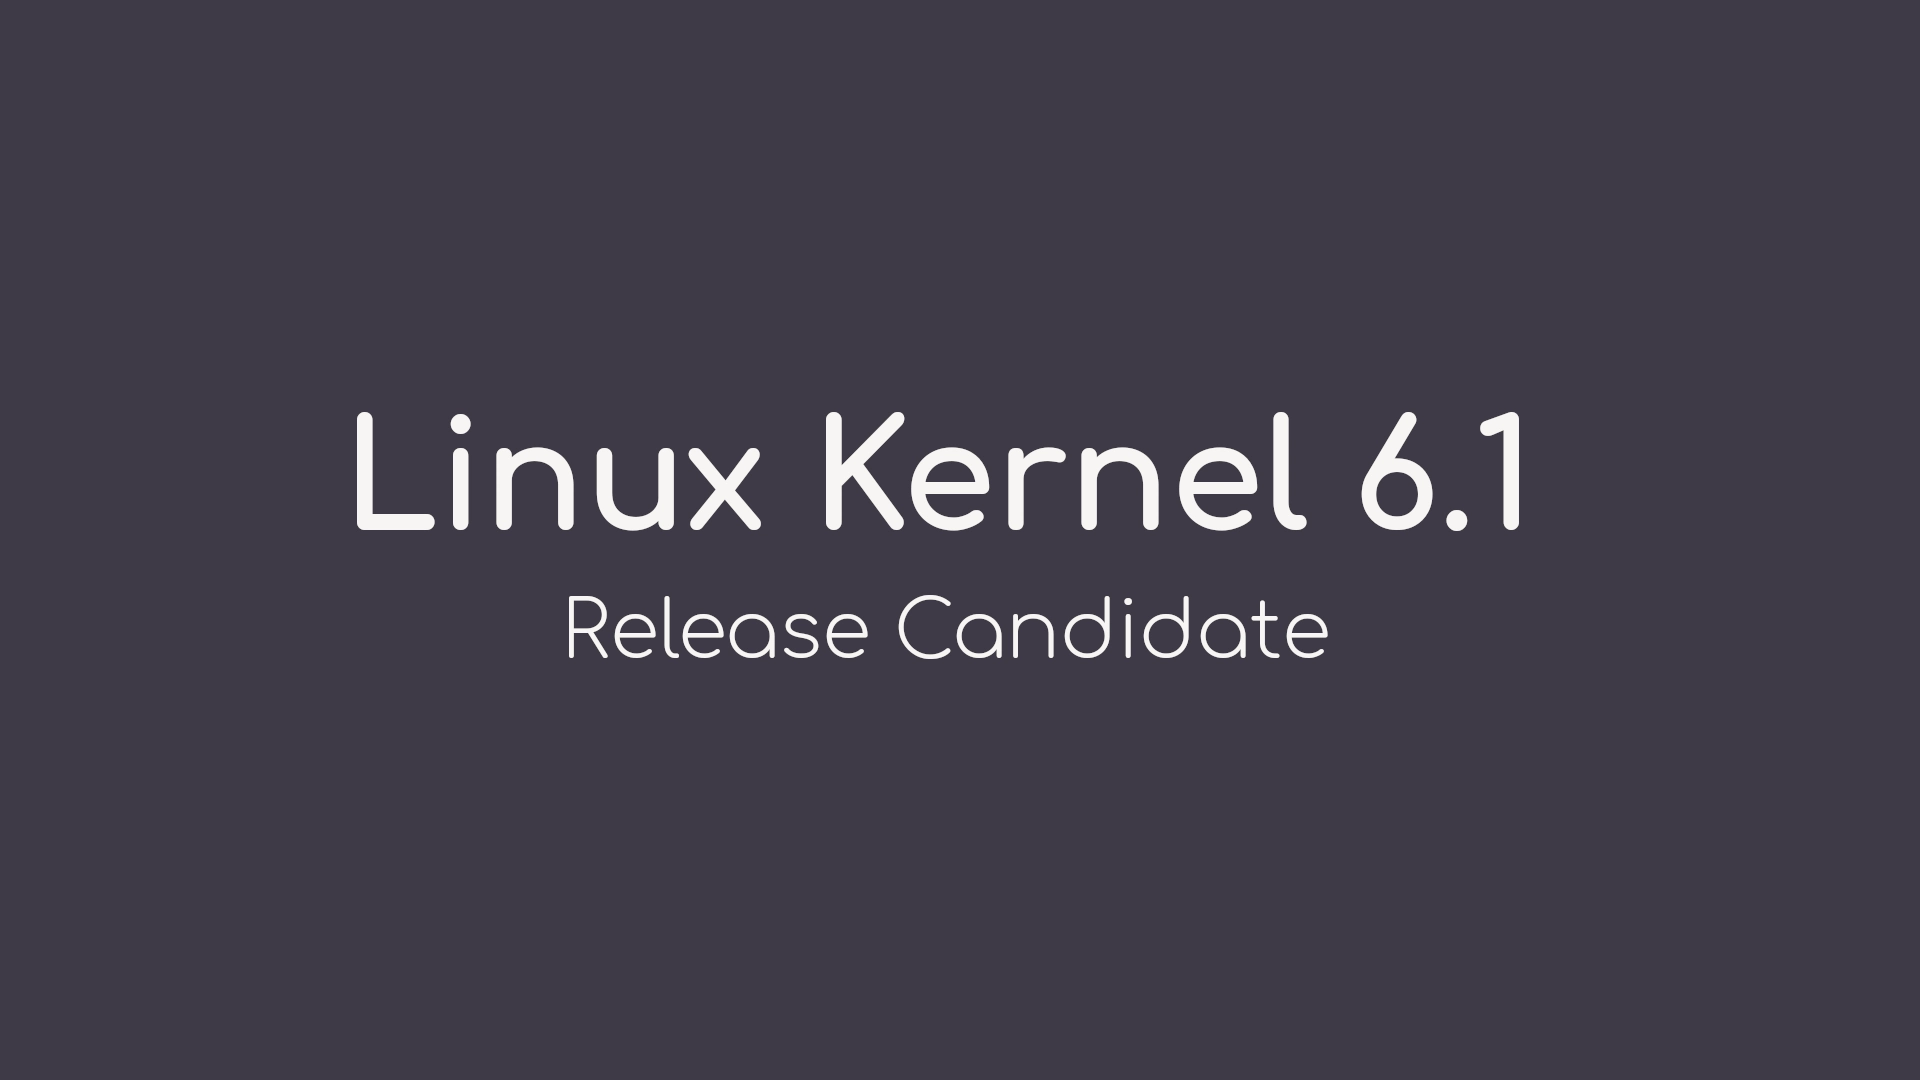 Linus Torvalds Announces First Linux Kernel 6.1 Release Candidate